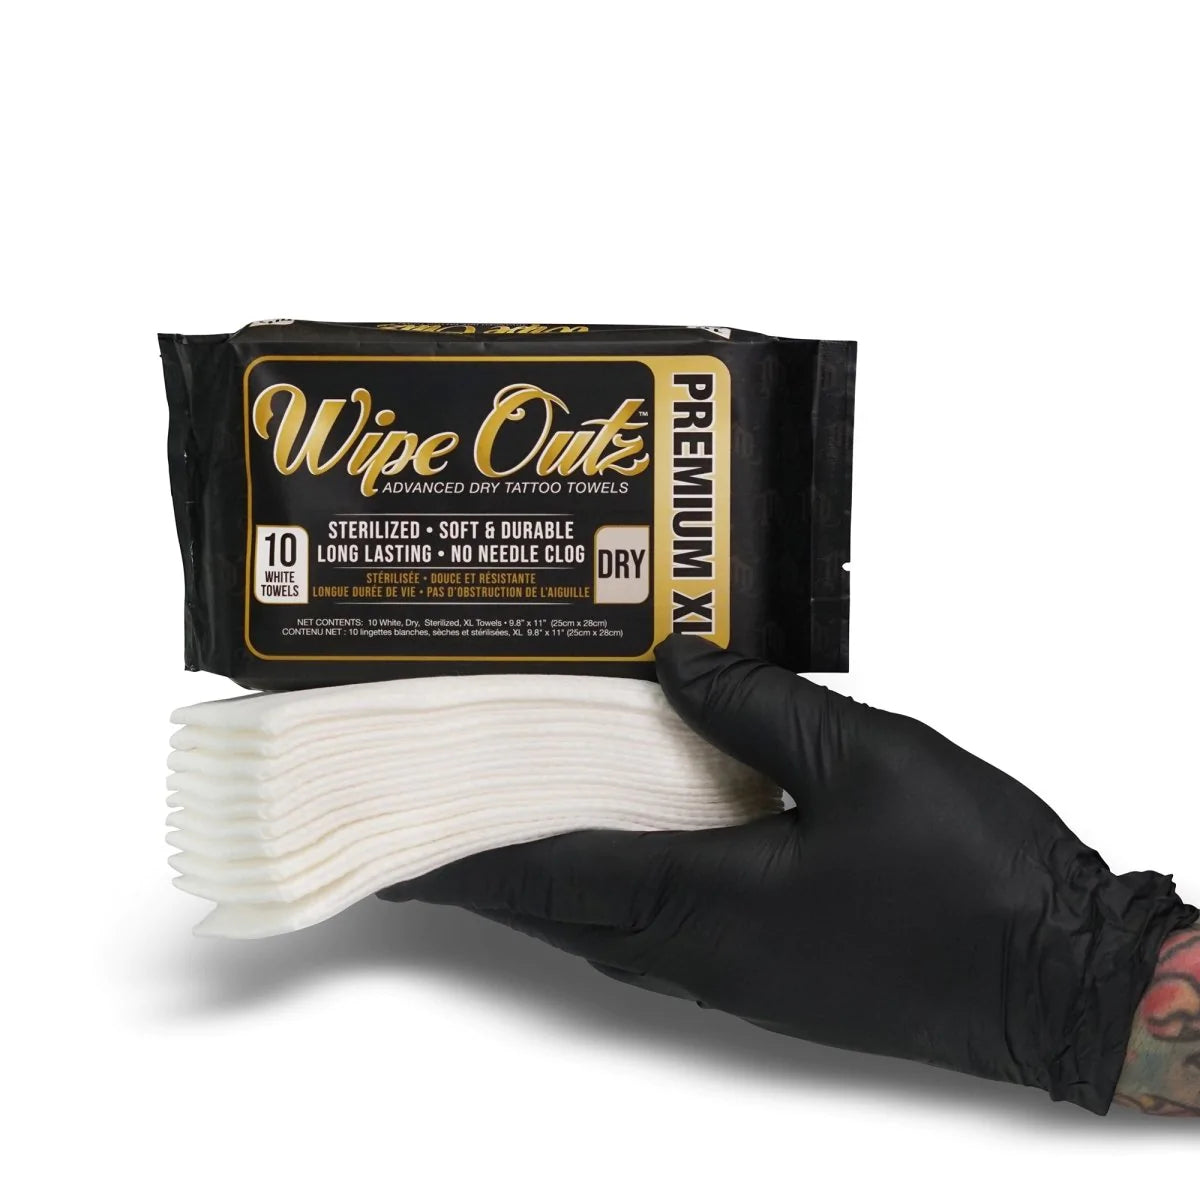 WIPE OUTZ XL Tattoo Towels (White 10CT)